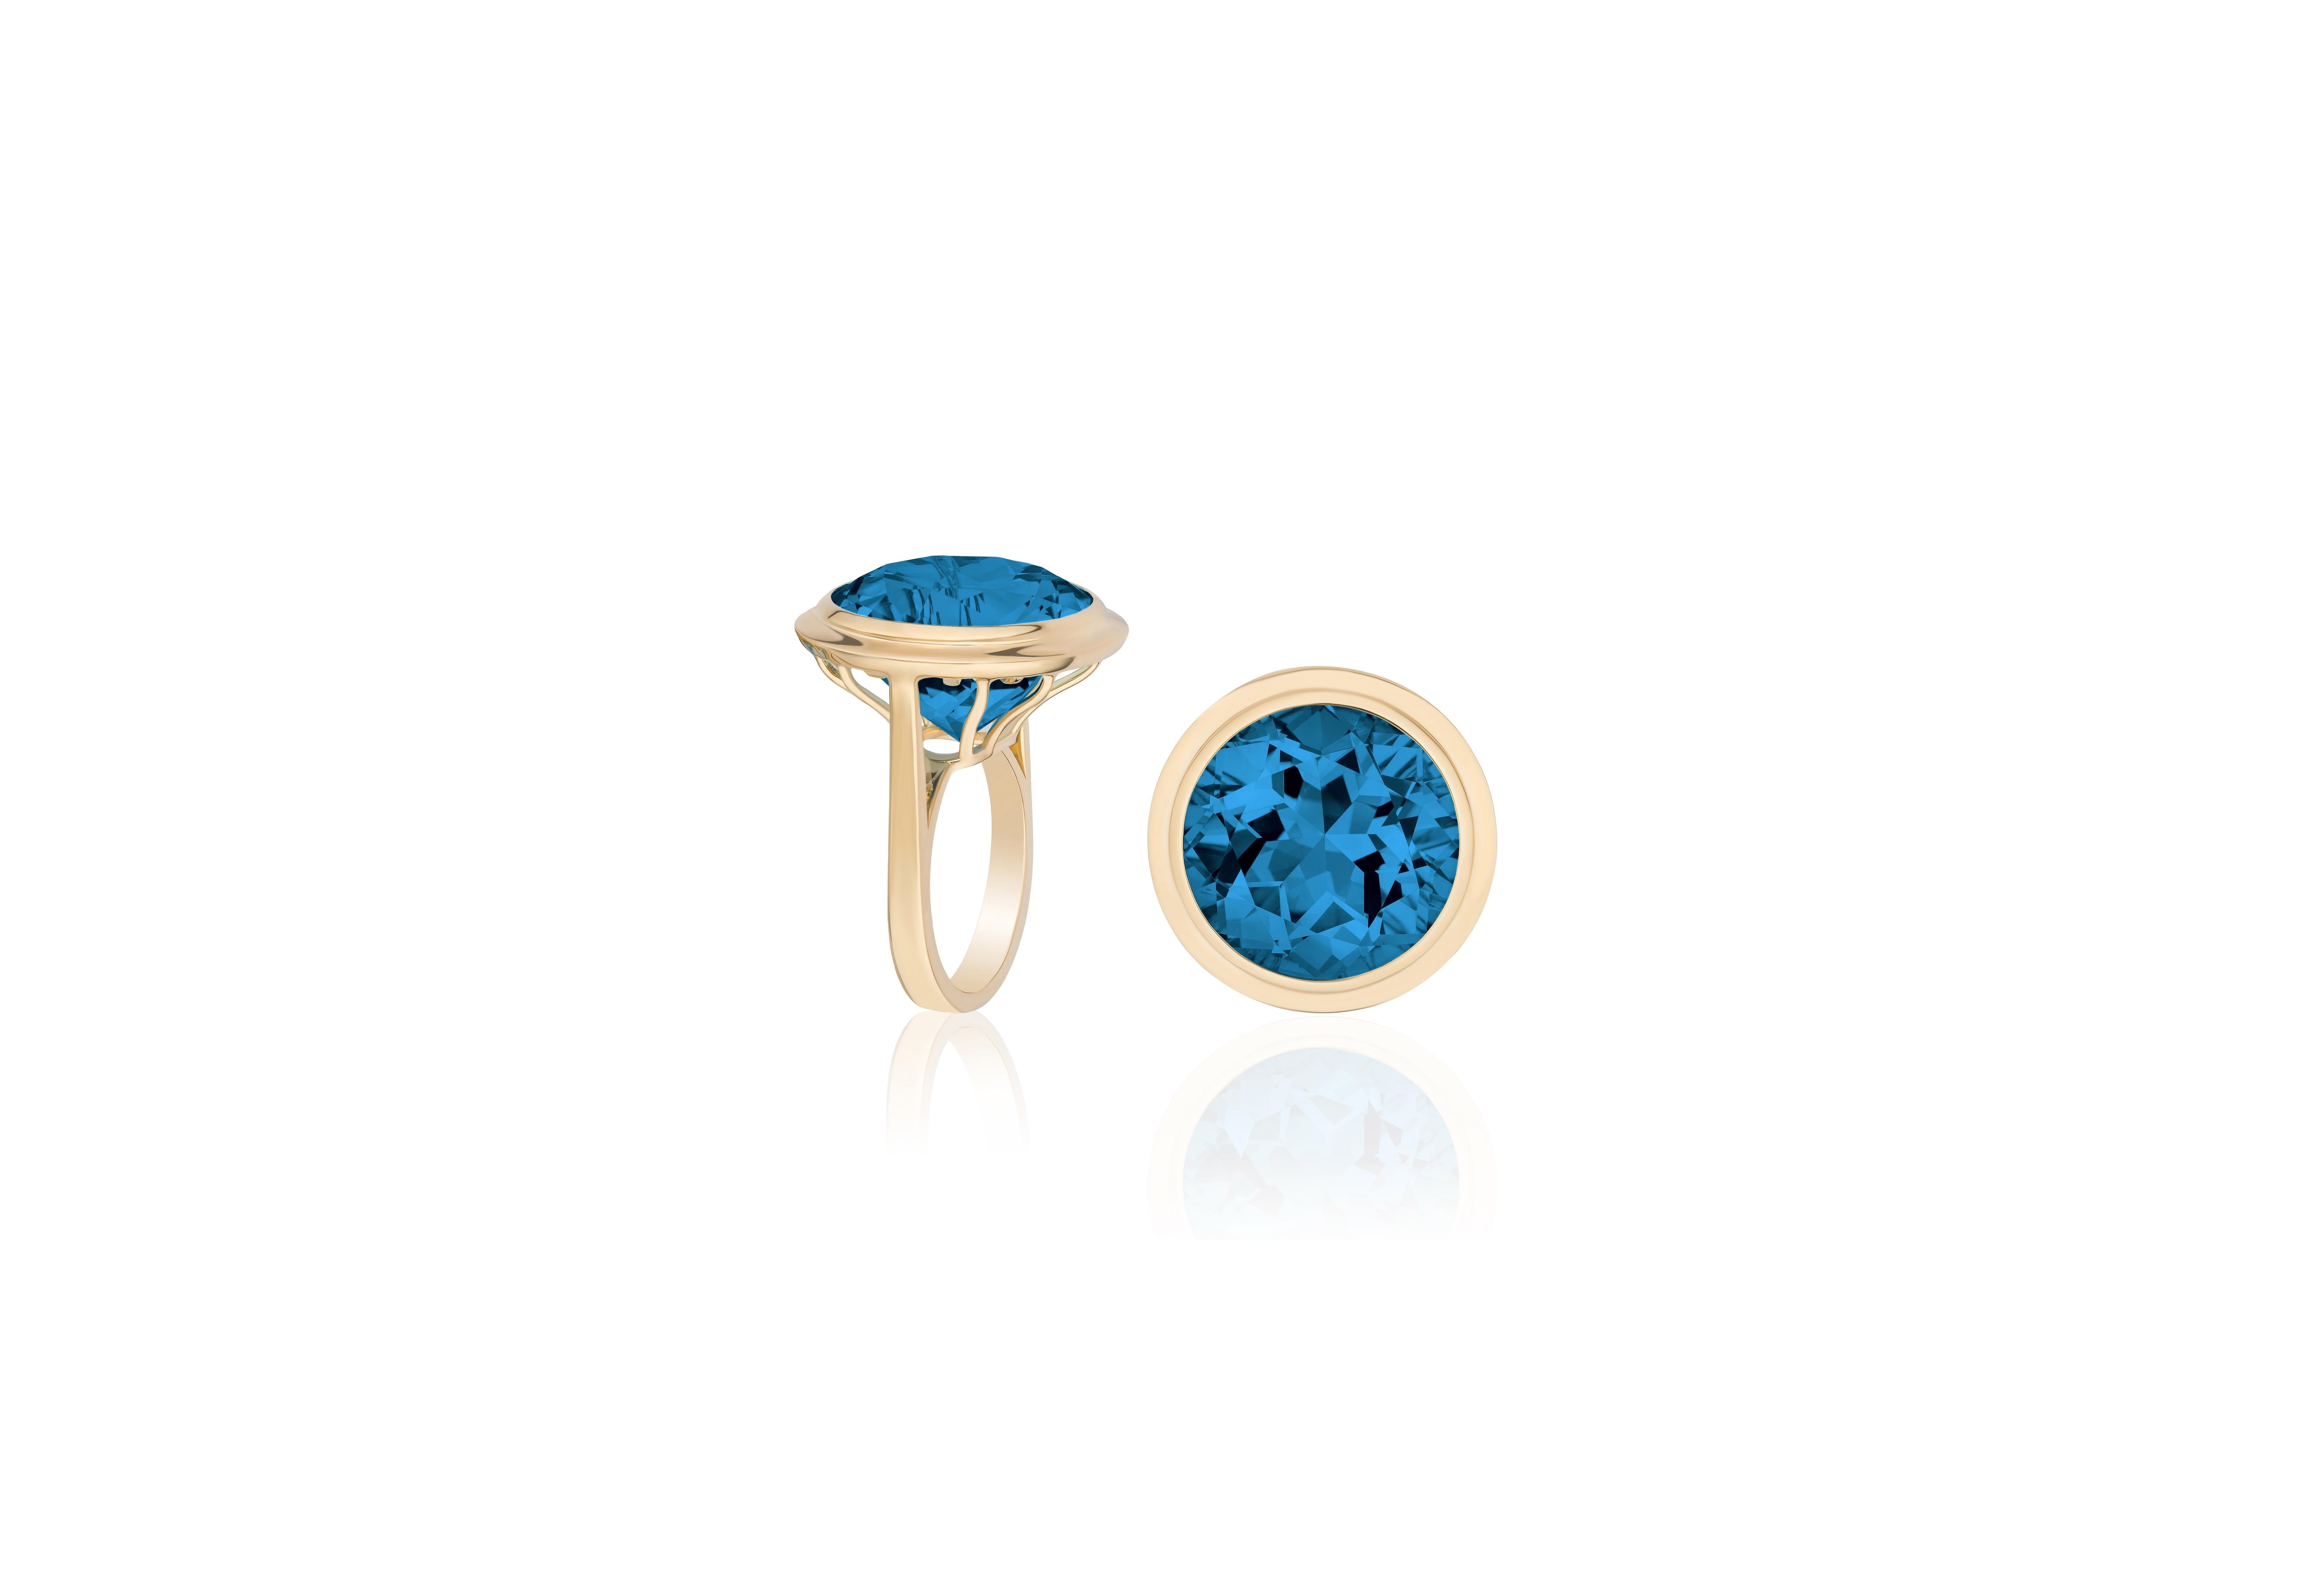 Exquisite Faceted Round London Blue Topaz Ring from the 'G-One' Collection by Goshwara. Crafted in luxurious 18K Yellow Gold, this captivating ring showcases a mesmerizing London Blue Topaz gemstone with a faceted round cut, radiating a deep and